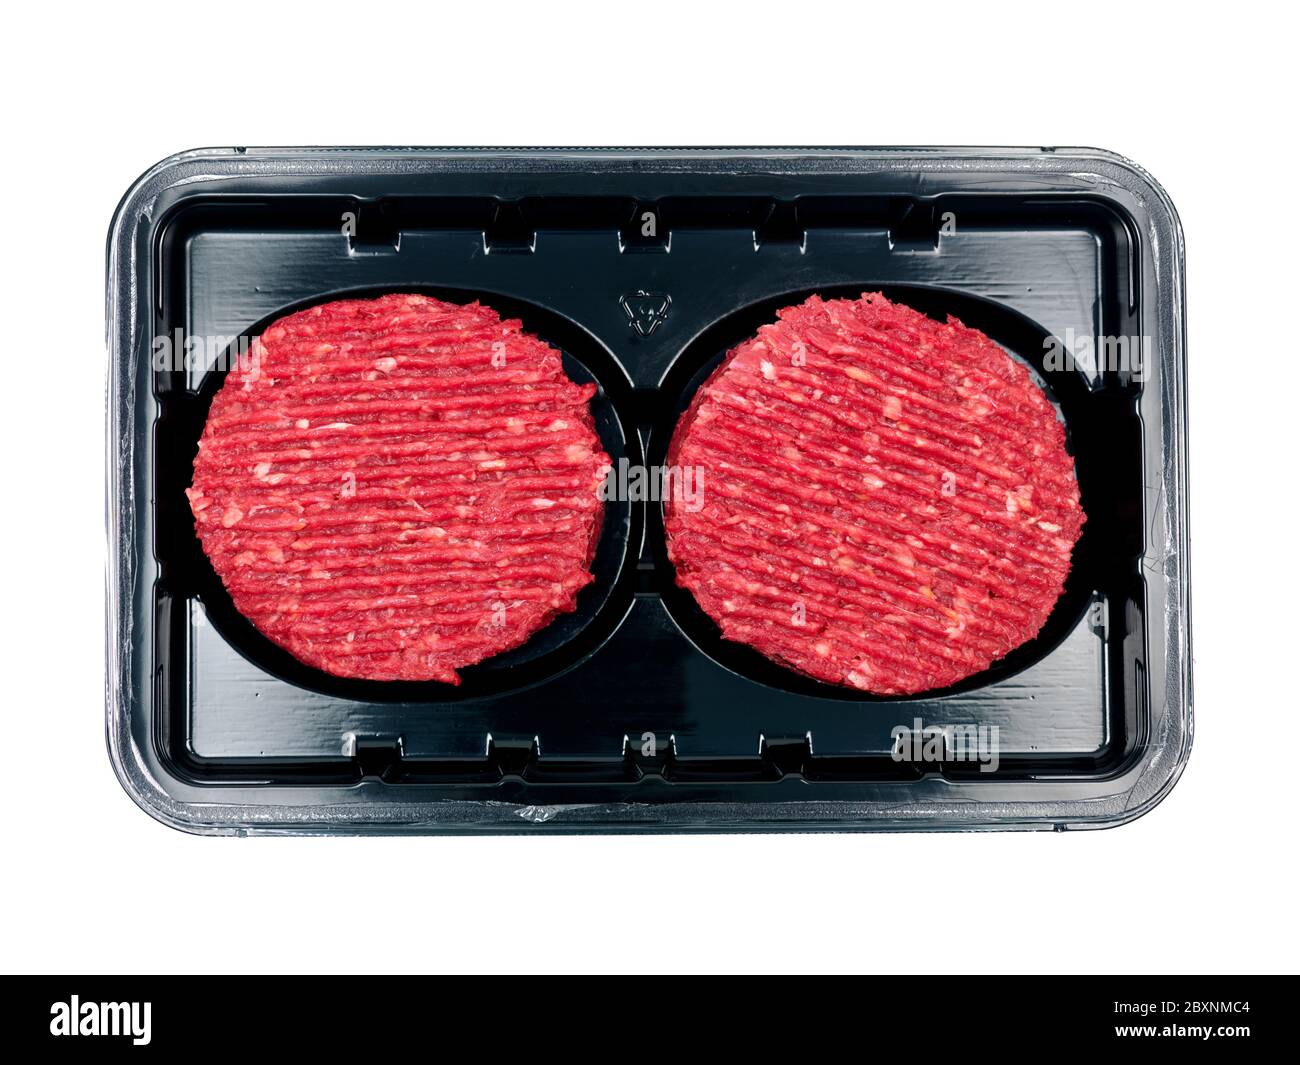 Burger patties in a supermarket packaging tray isolated on a white background Stock Photo